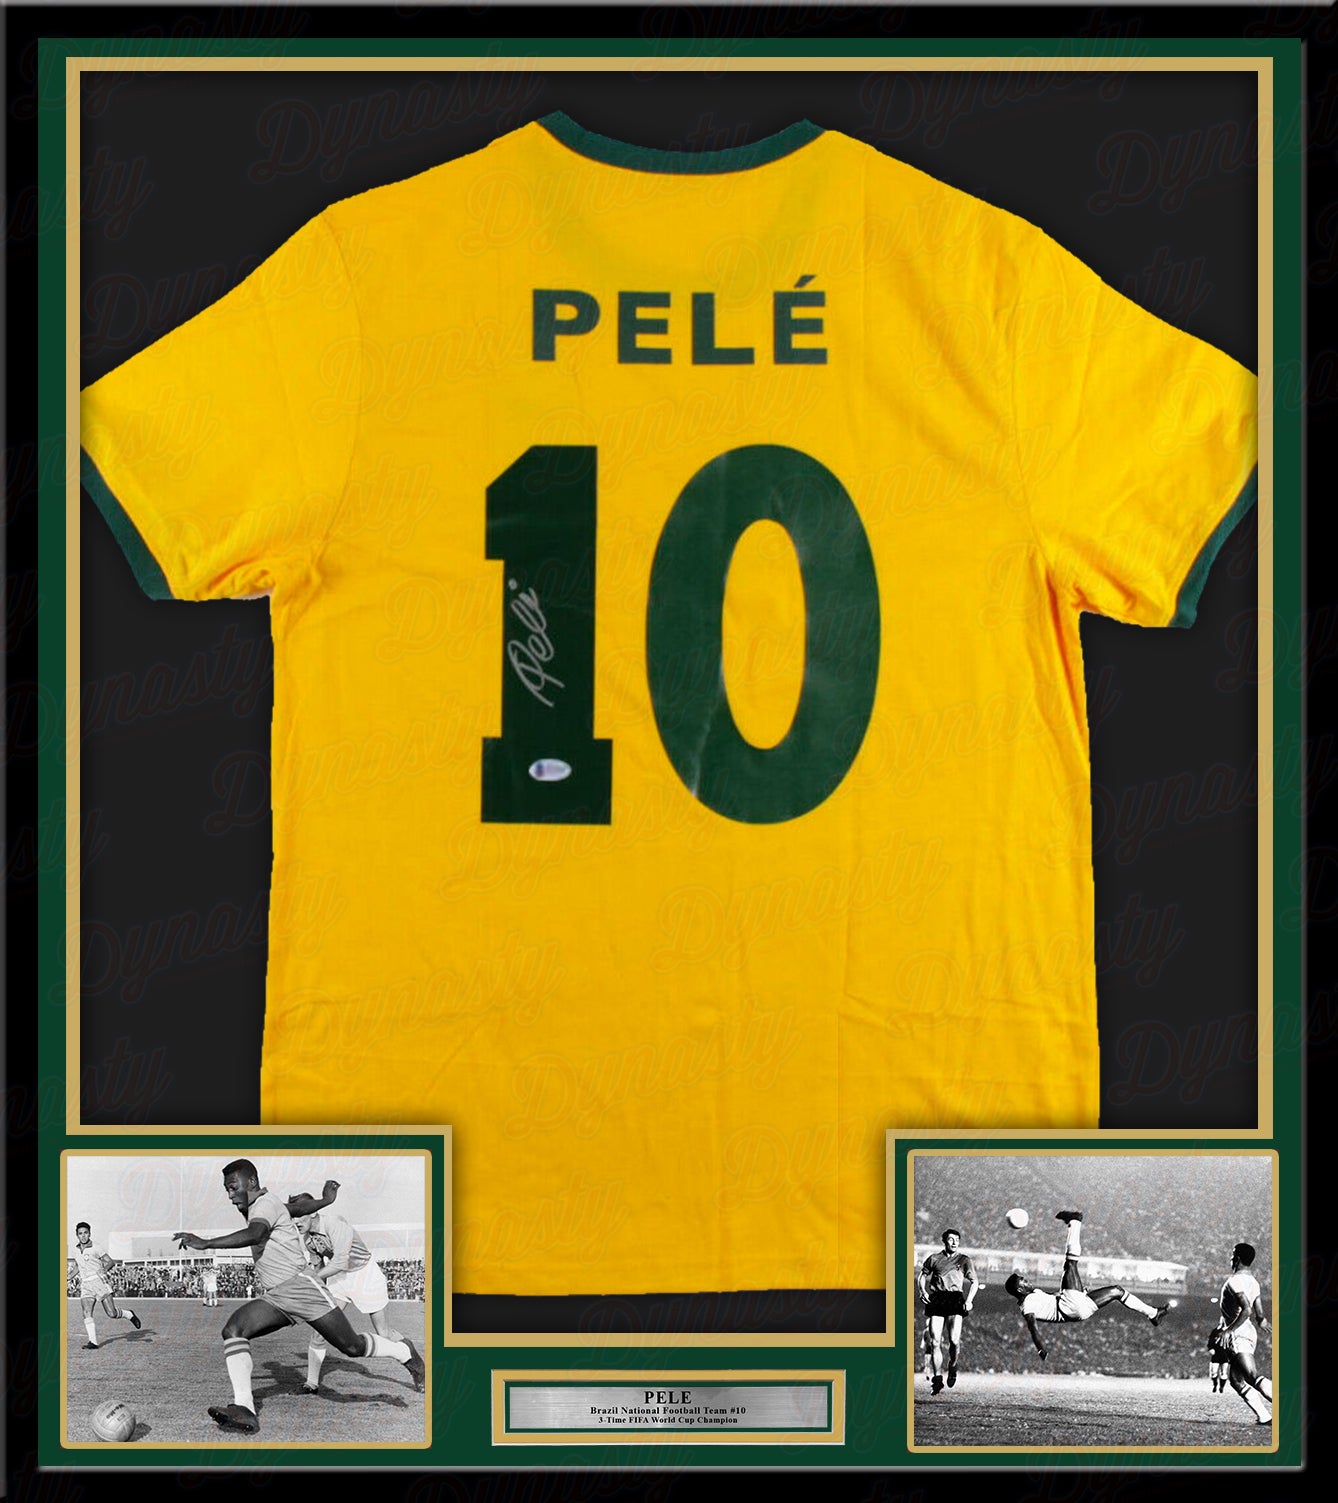 Pele Autographed Framed Soccer Jersey & Photo Collage - Dynasty Sports & Framing 